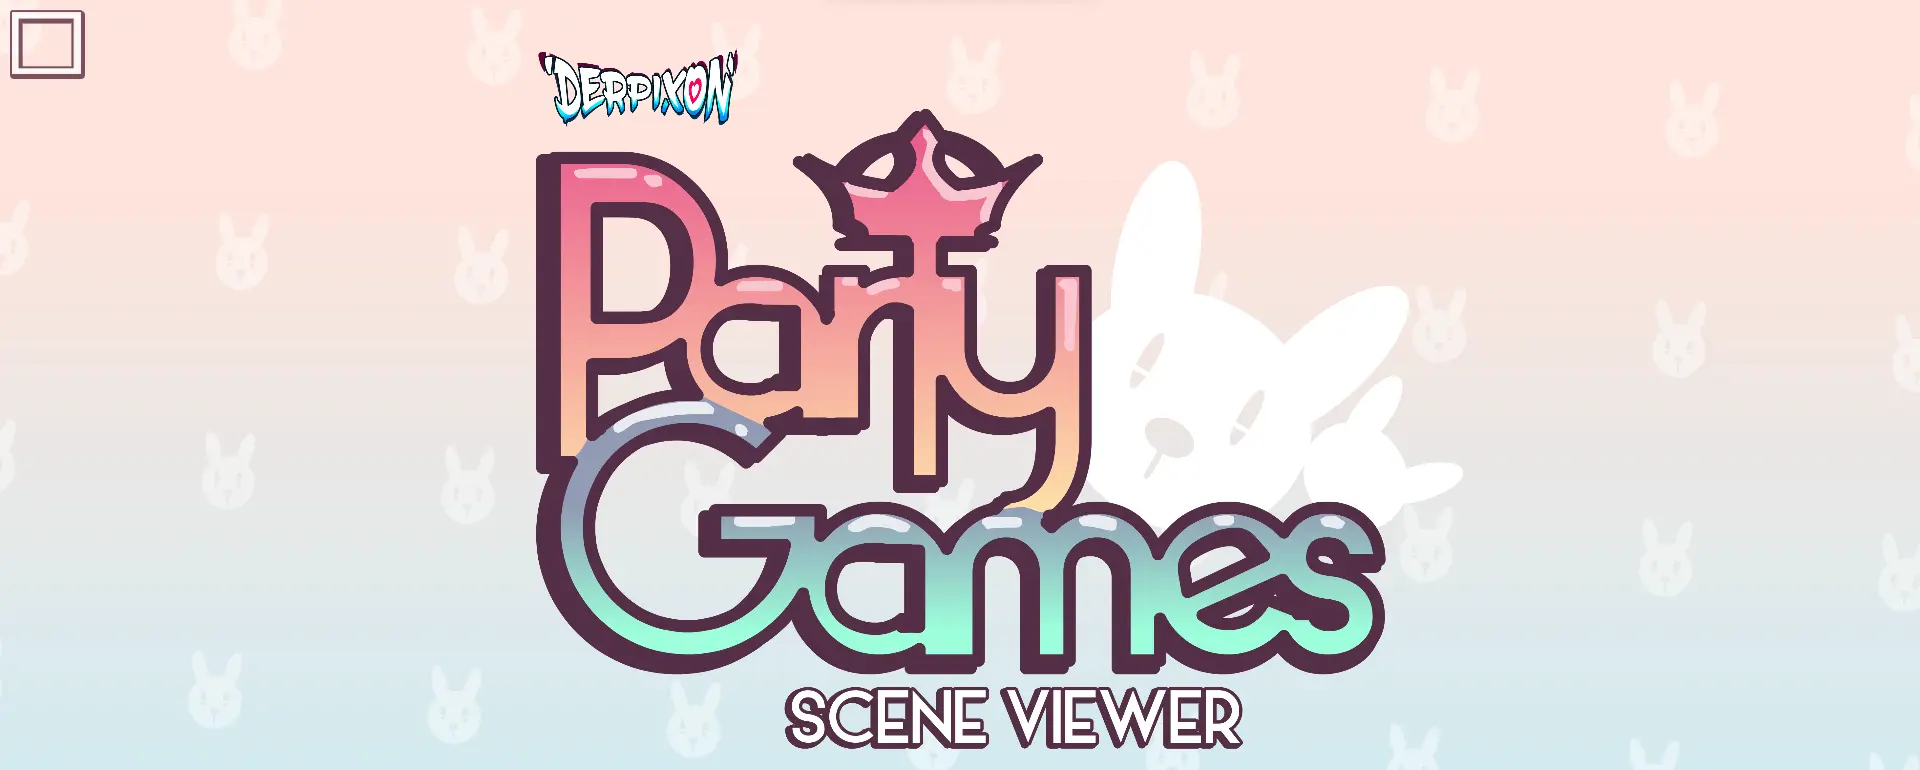 Party Games - Scene Viewer main image